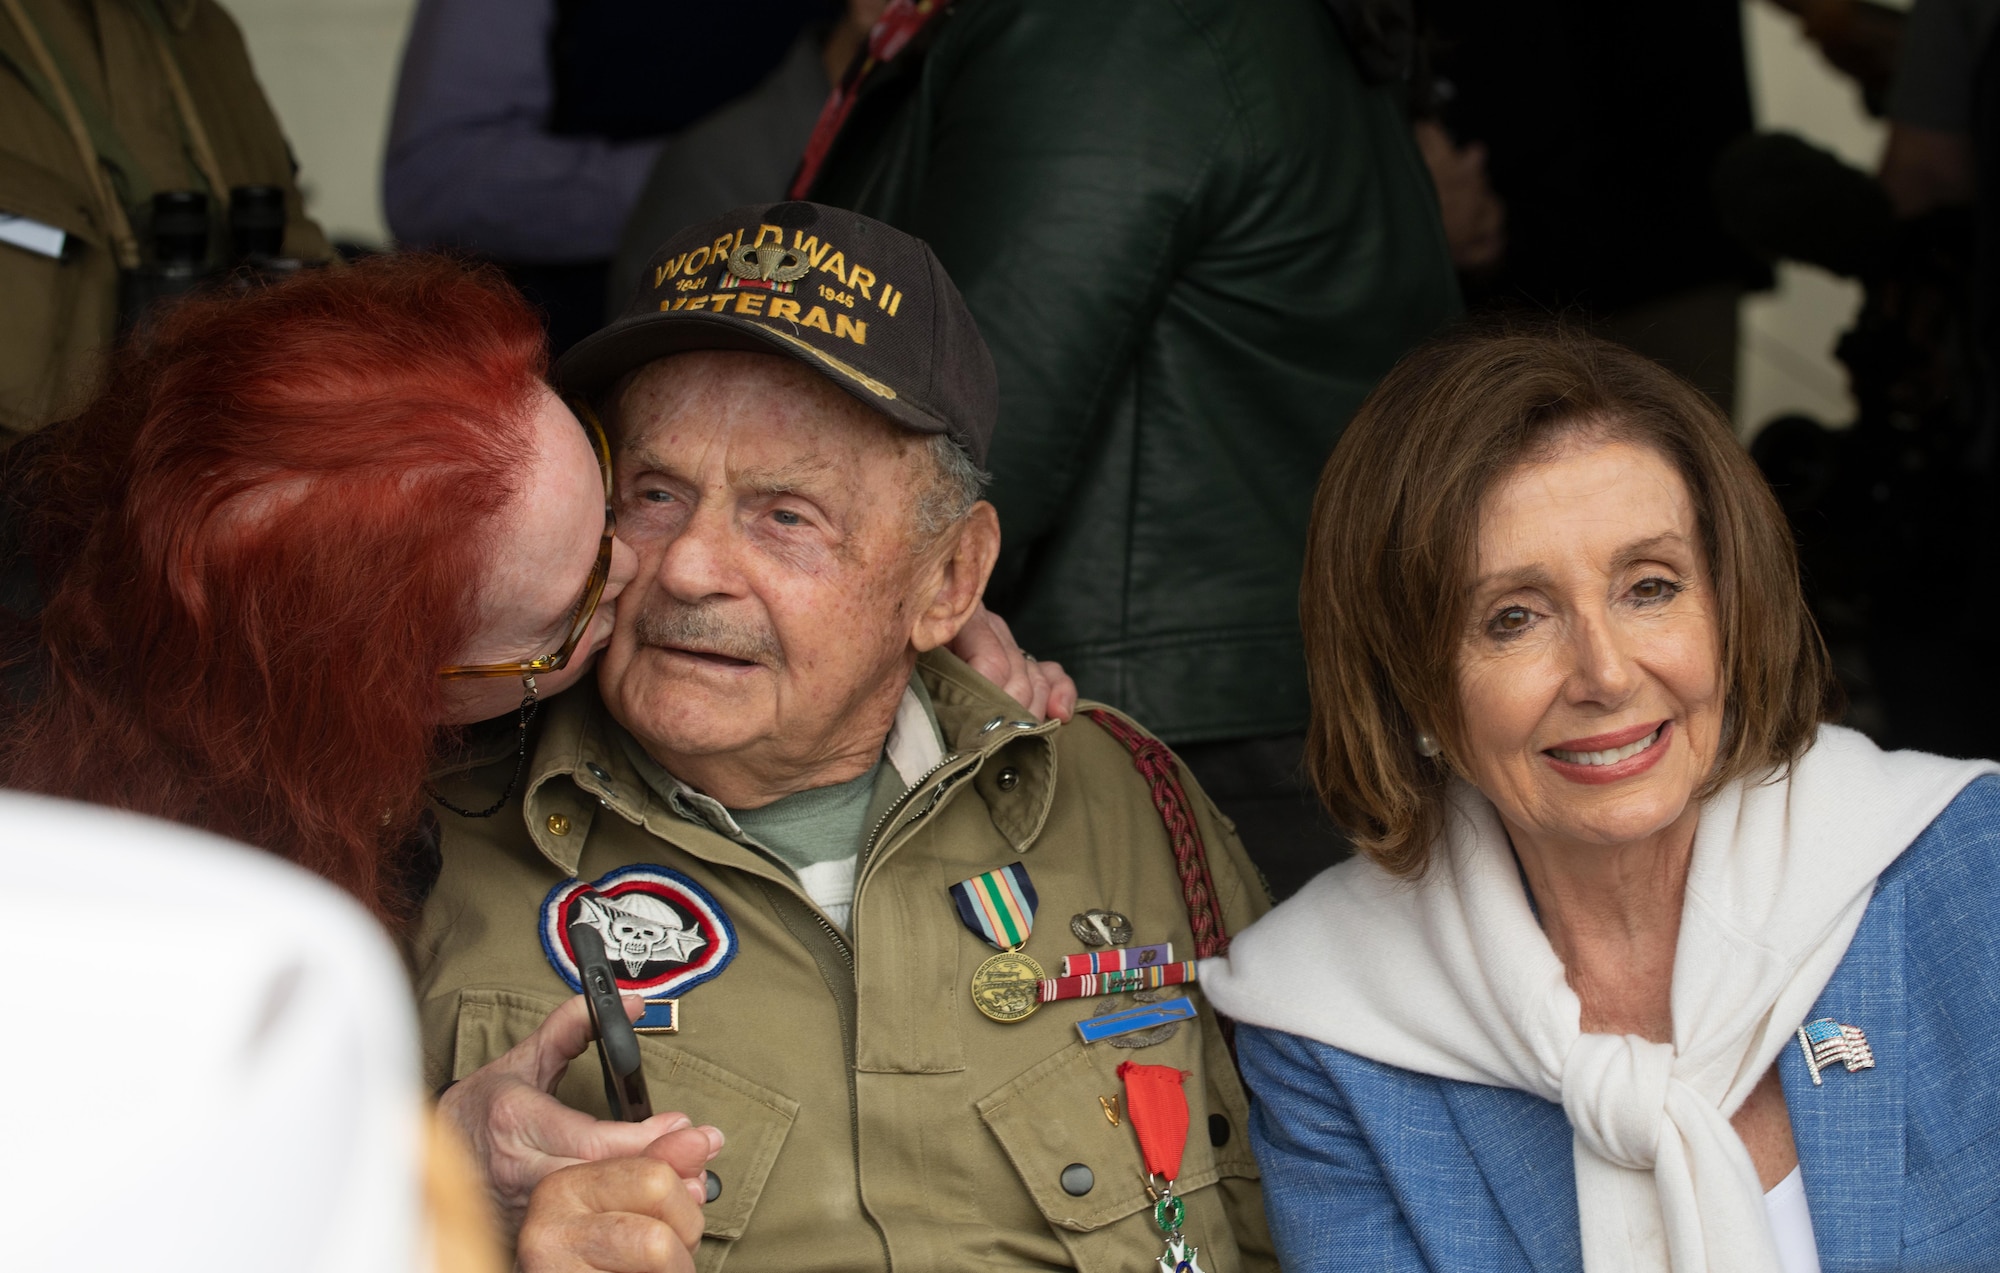 World War II veteran Dan McBride (or George Merz) and U.S. House of Representatives president Nancy Pelosi pose for a photo at the D-Day 75 Commemorative Airborne Operation in Sainte-Mere-Eglise, France, June 9, 2019, which honors the epic airborne operation conducted by Allied forces on June 6, 1944. This commemorative airborne operation was an opportunity for multinational forces to honor the past and simultaneously work to secure the future. Training together in the very same place that trans-Atlantic resolve began 75 years ago demonstrates the partnerships and bonds that we highly value and continue to benefit from to this day. (U.S. Air Force photo by Airman 1st Class Jennifer Zima)